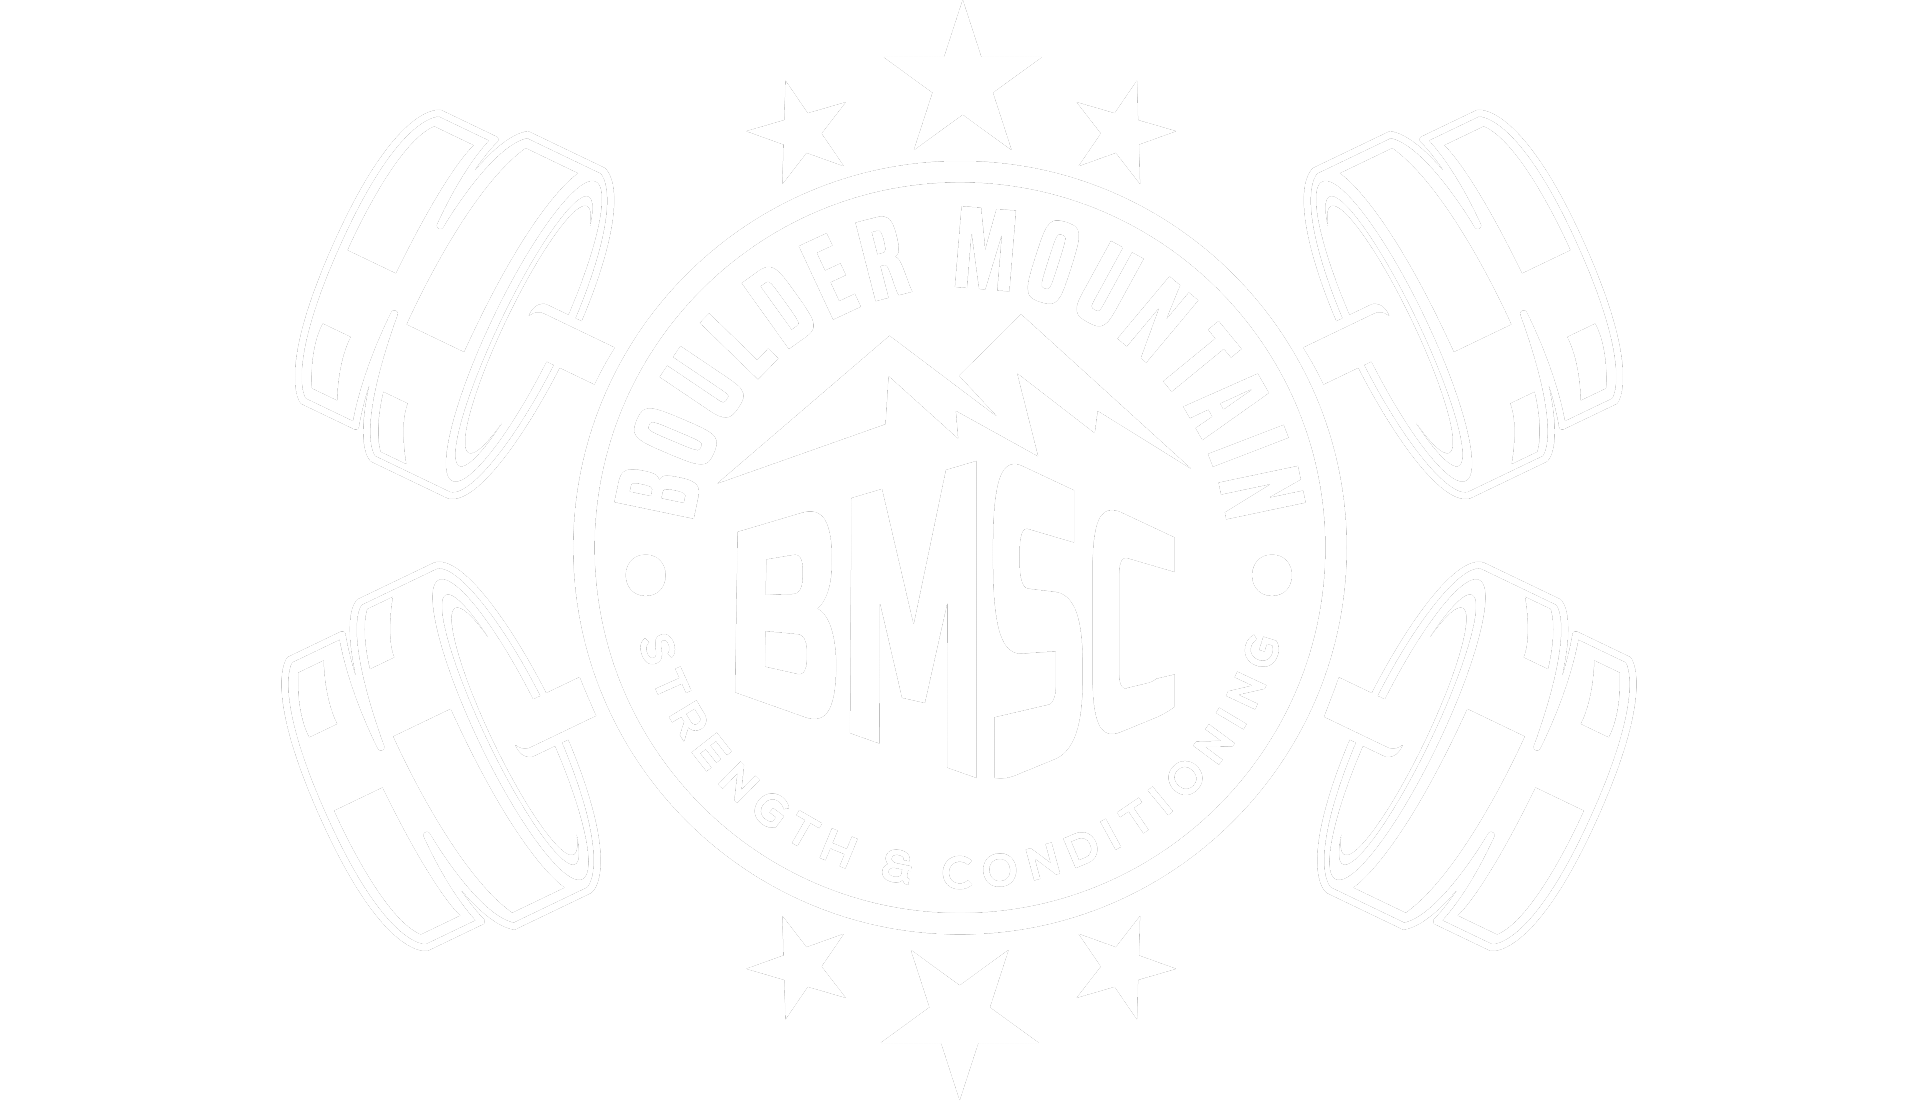 Boulder Mountain Strength & Conditioning